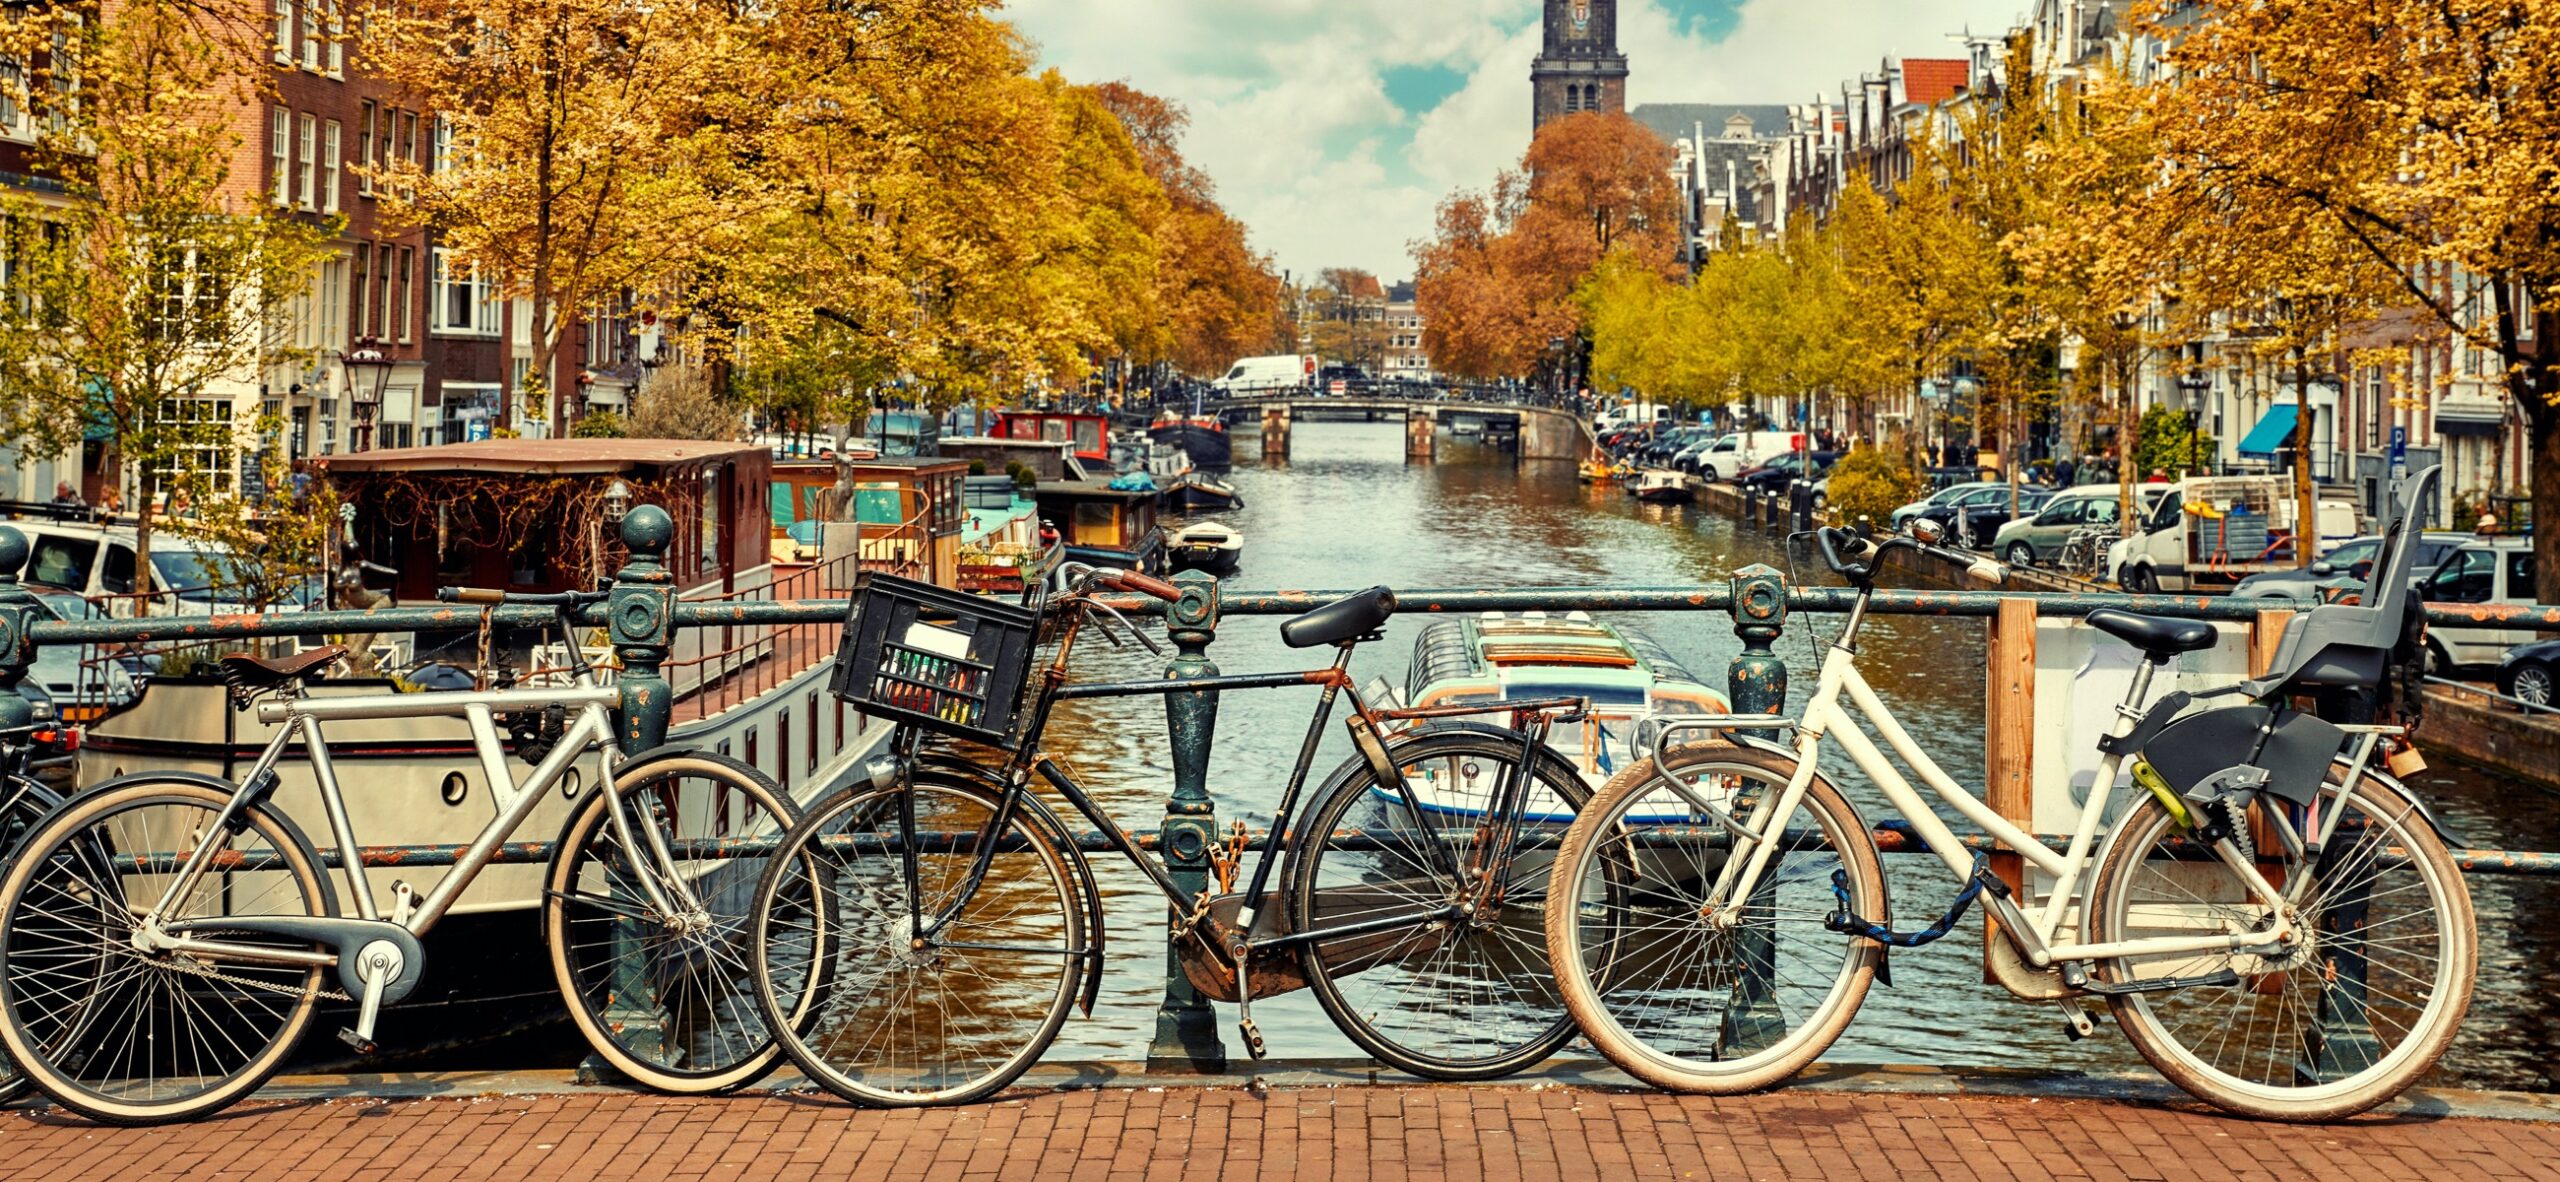 Canals, Museums and More: Amsterdam’s Best Bits